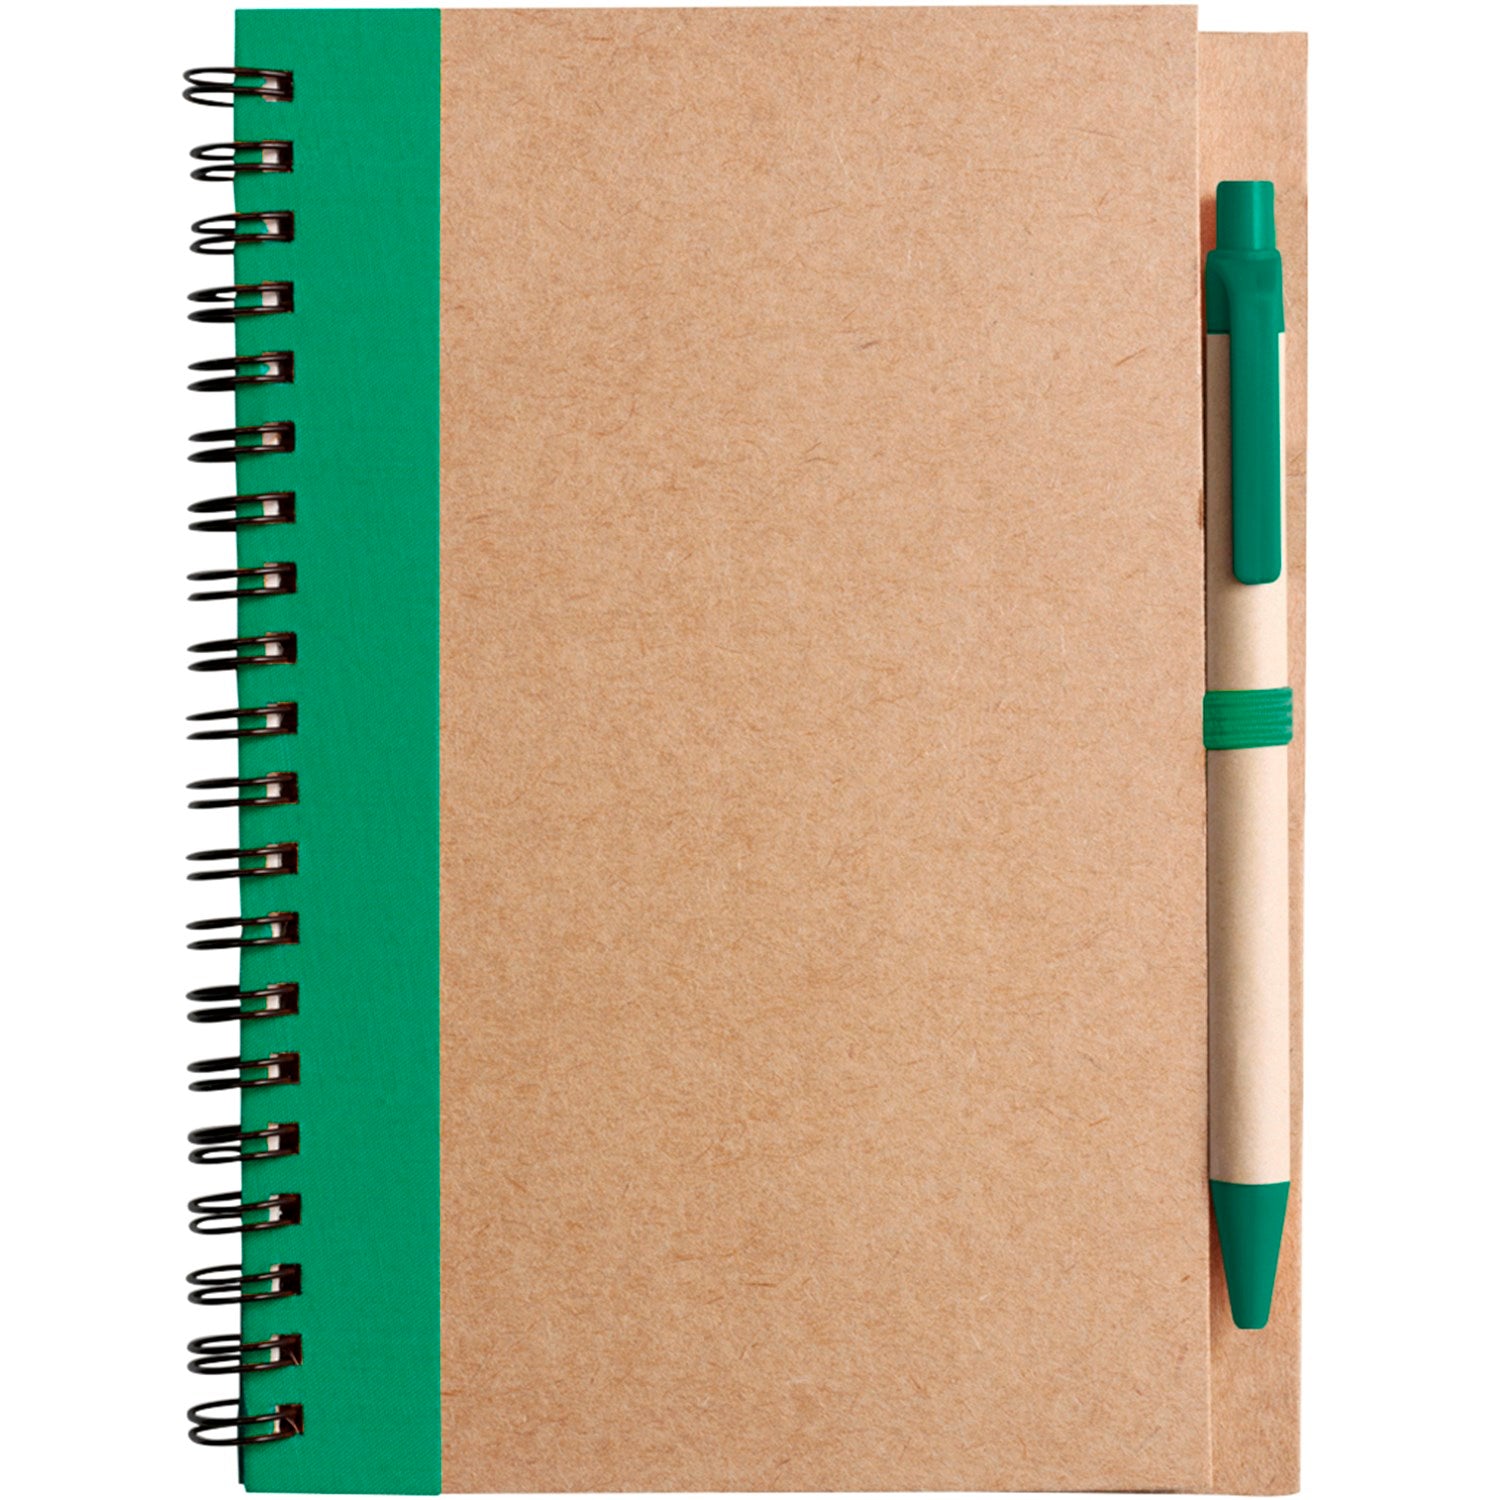 Cardboard Branded Notebook With Pen